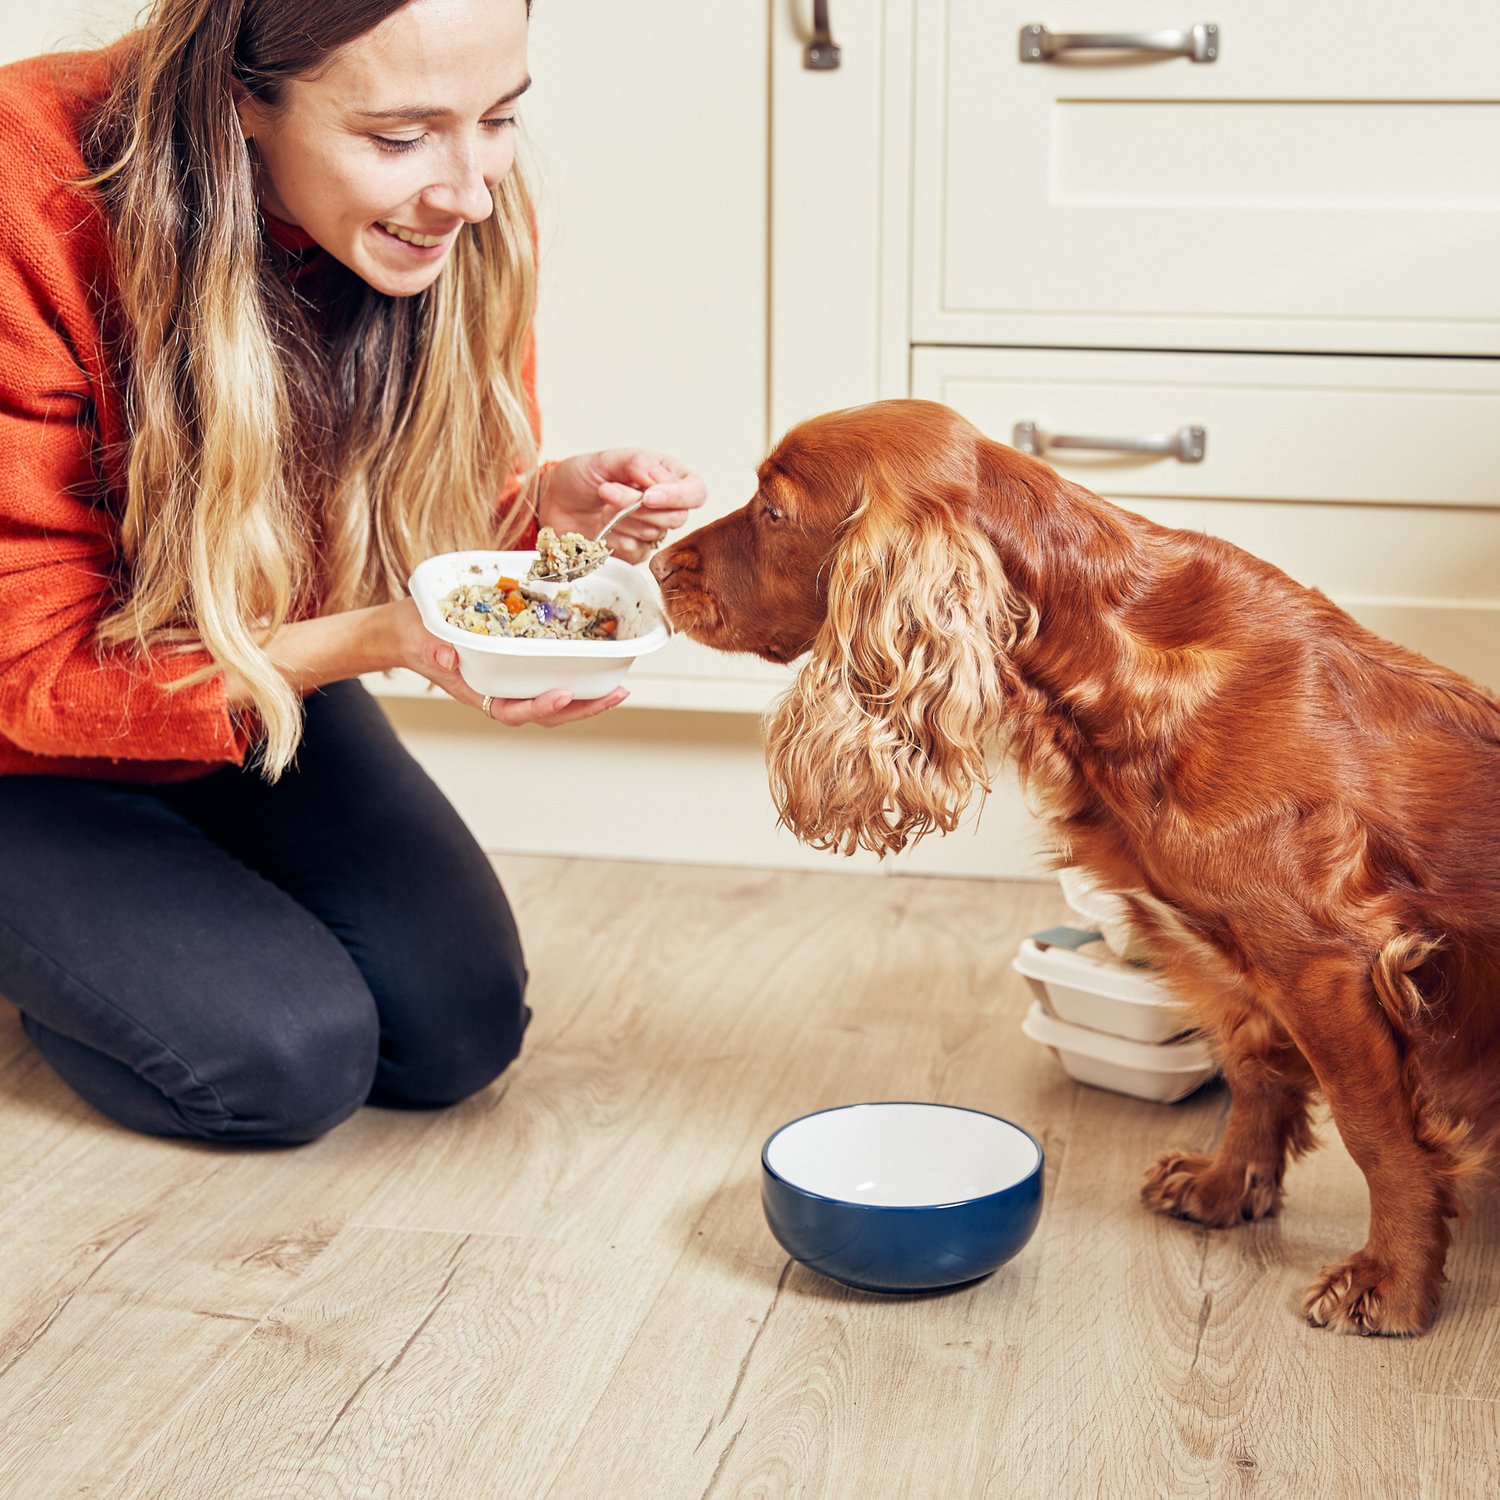 How much should you feed a dog and how often?